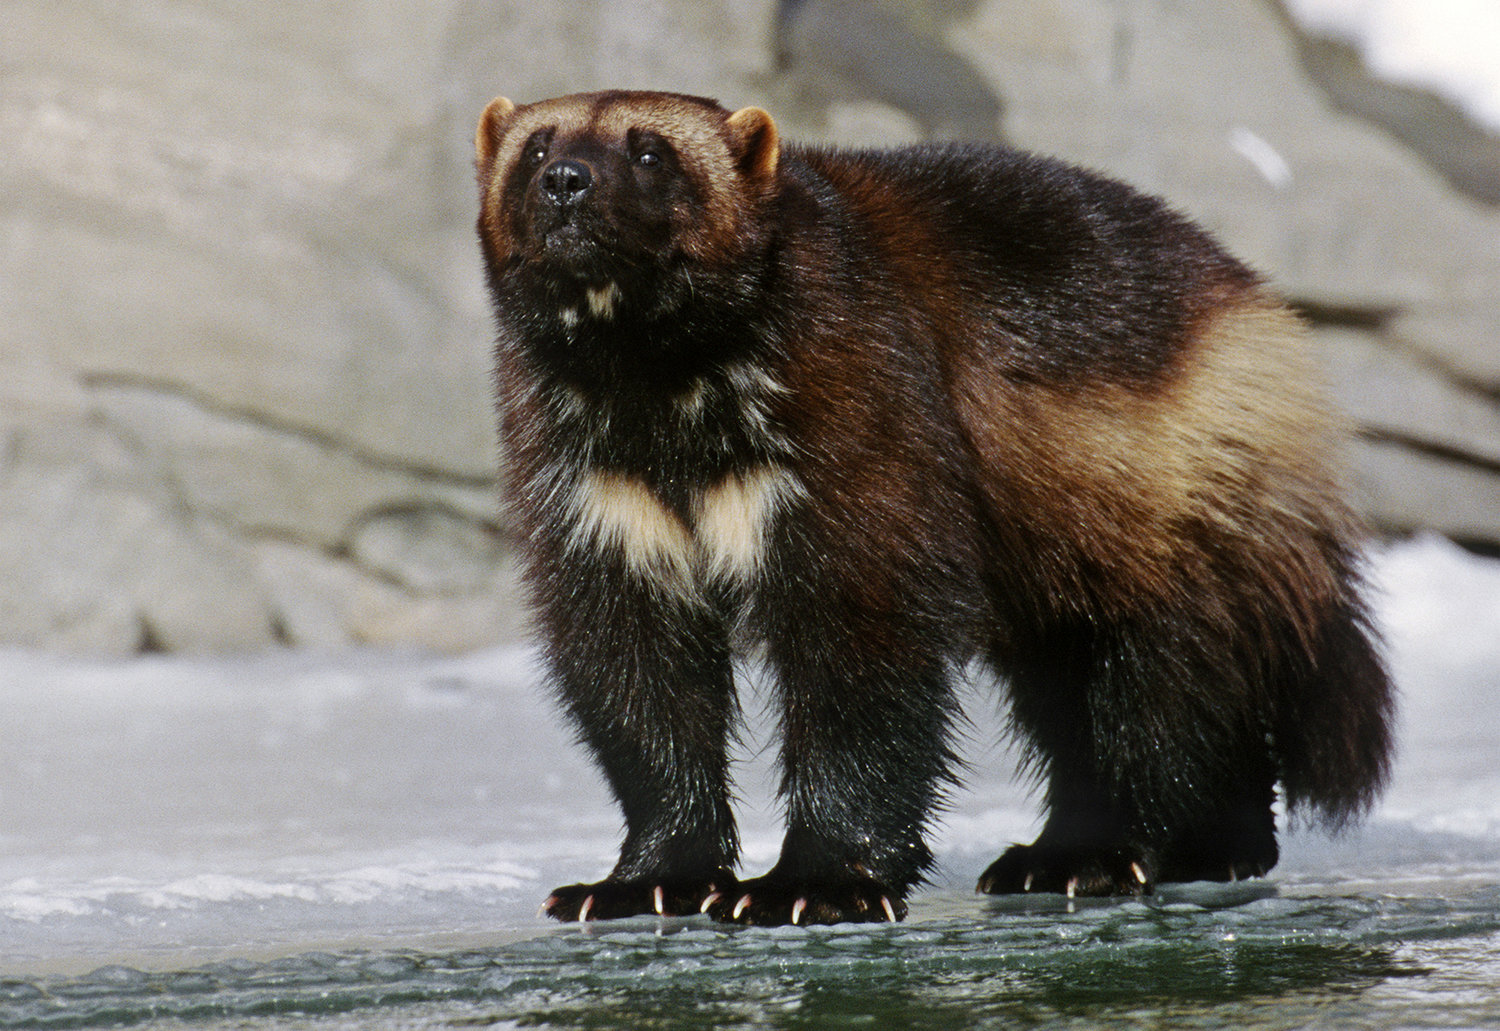 This 1996 photo provided by NaturalExposures.com shows an adult wolverine on a frozen river taken in the Bridger Mountains north of Bozeman, Mont. The Obama administration brushed over the threat that climate change poses to the snow-loving wolverine when it denied protections for the elusive predator also known as the "mountain devil," a federal judge ruled Monday, April 4, 2016. (Daniel J. Cox/NaturalExposures.com via AP)